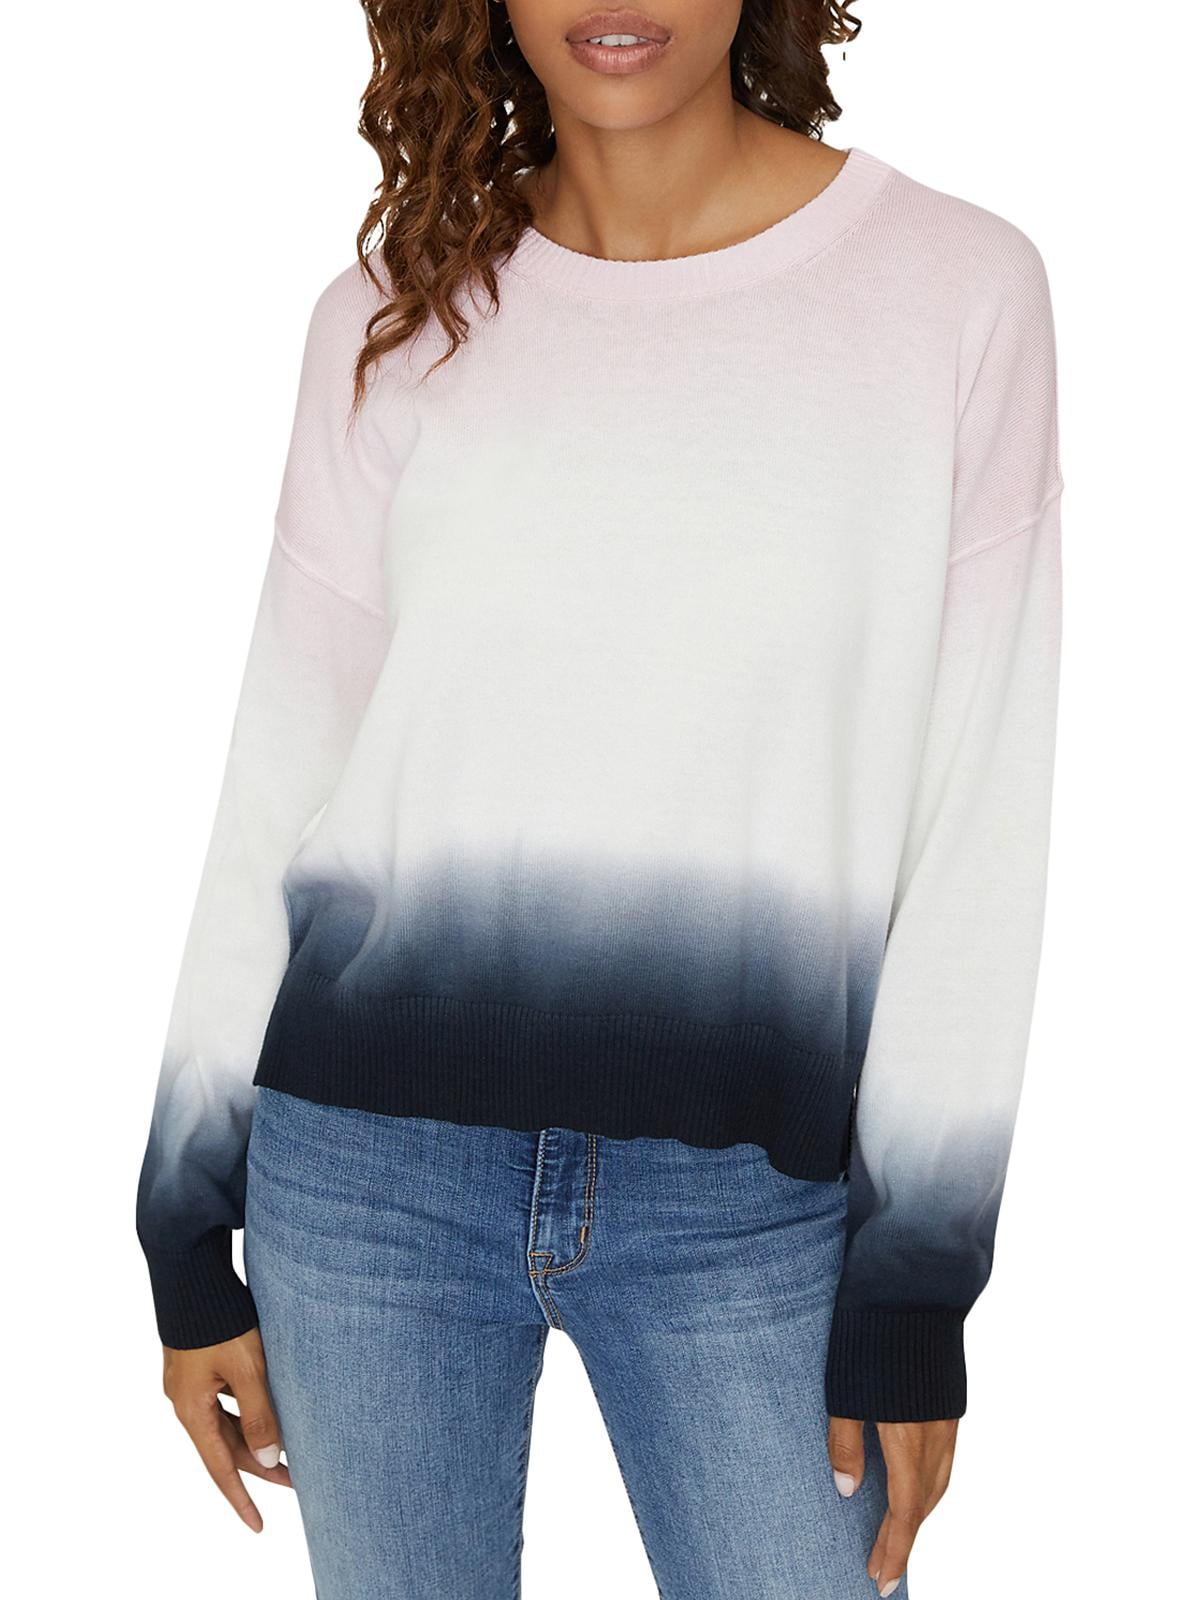 Sanctuary Womens Sunsetter Ombre Pullover Shirt Crewneck Sweater Top BHFO 0741 